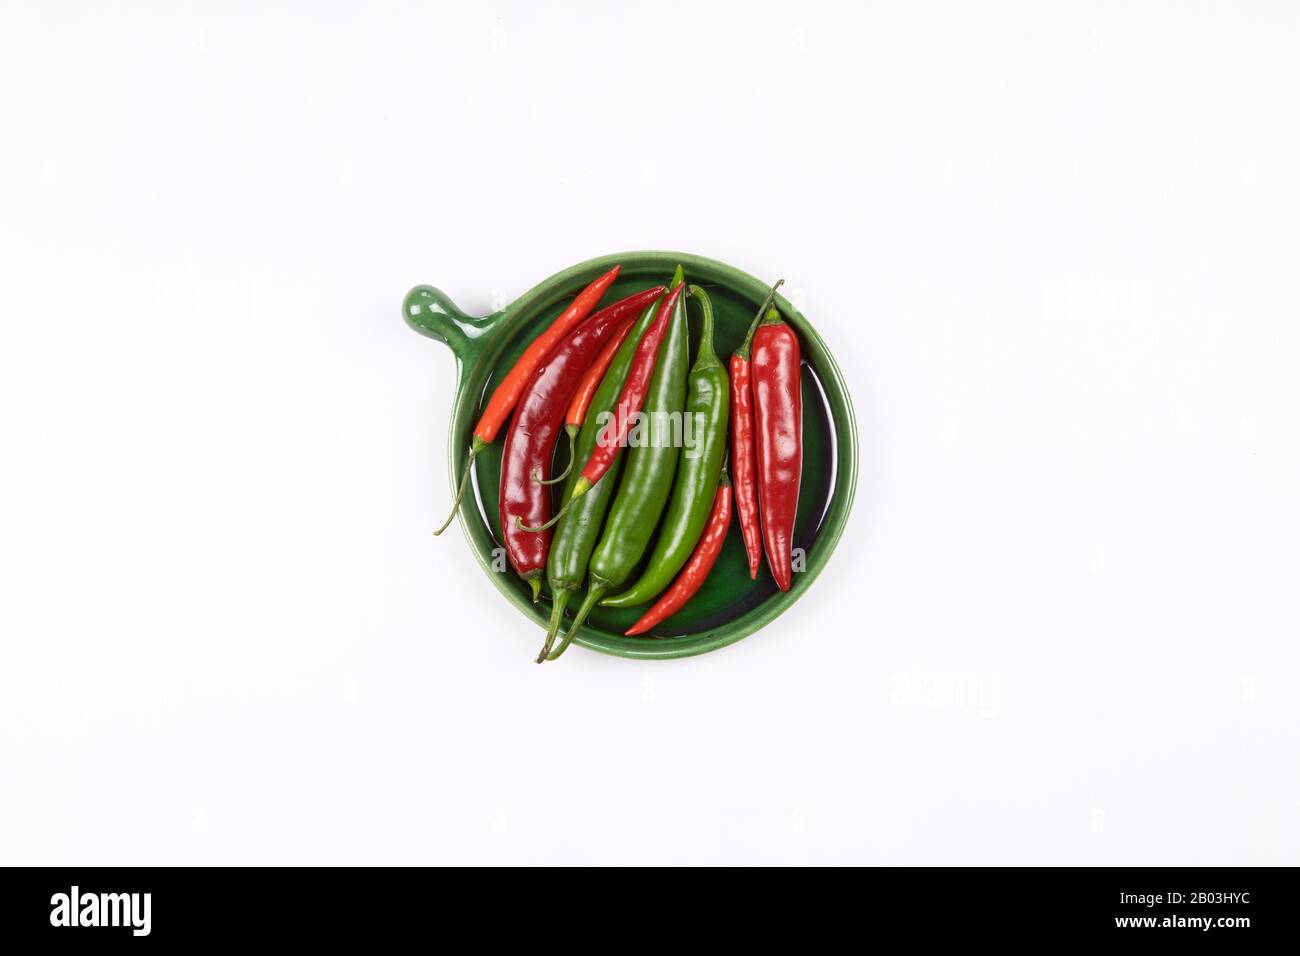 Close up of red and green hot chili peppers on green plate flat lay, white background. Stock Photo